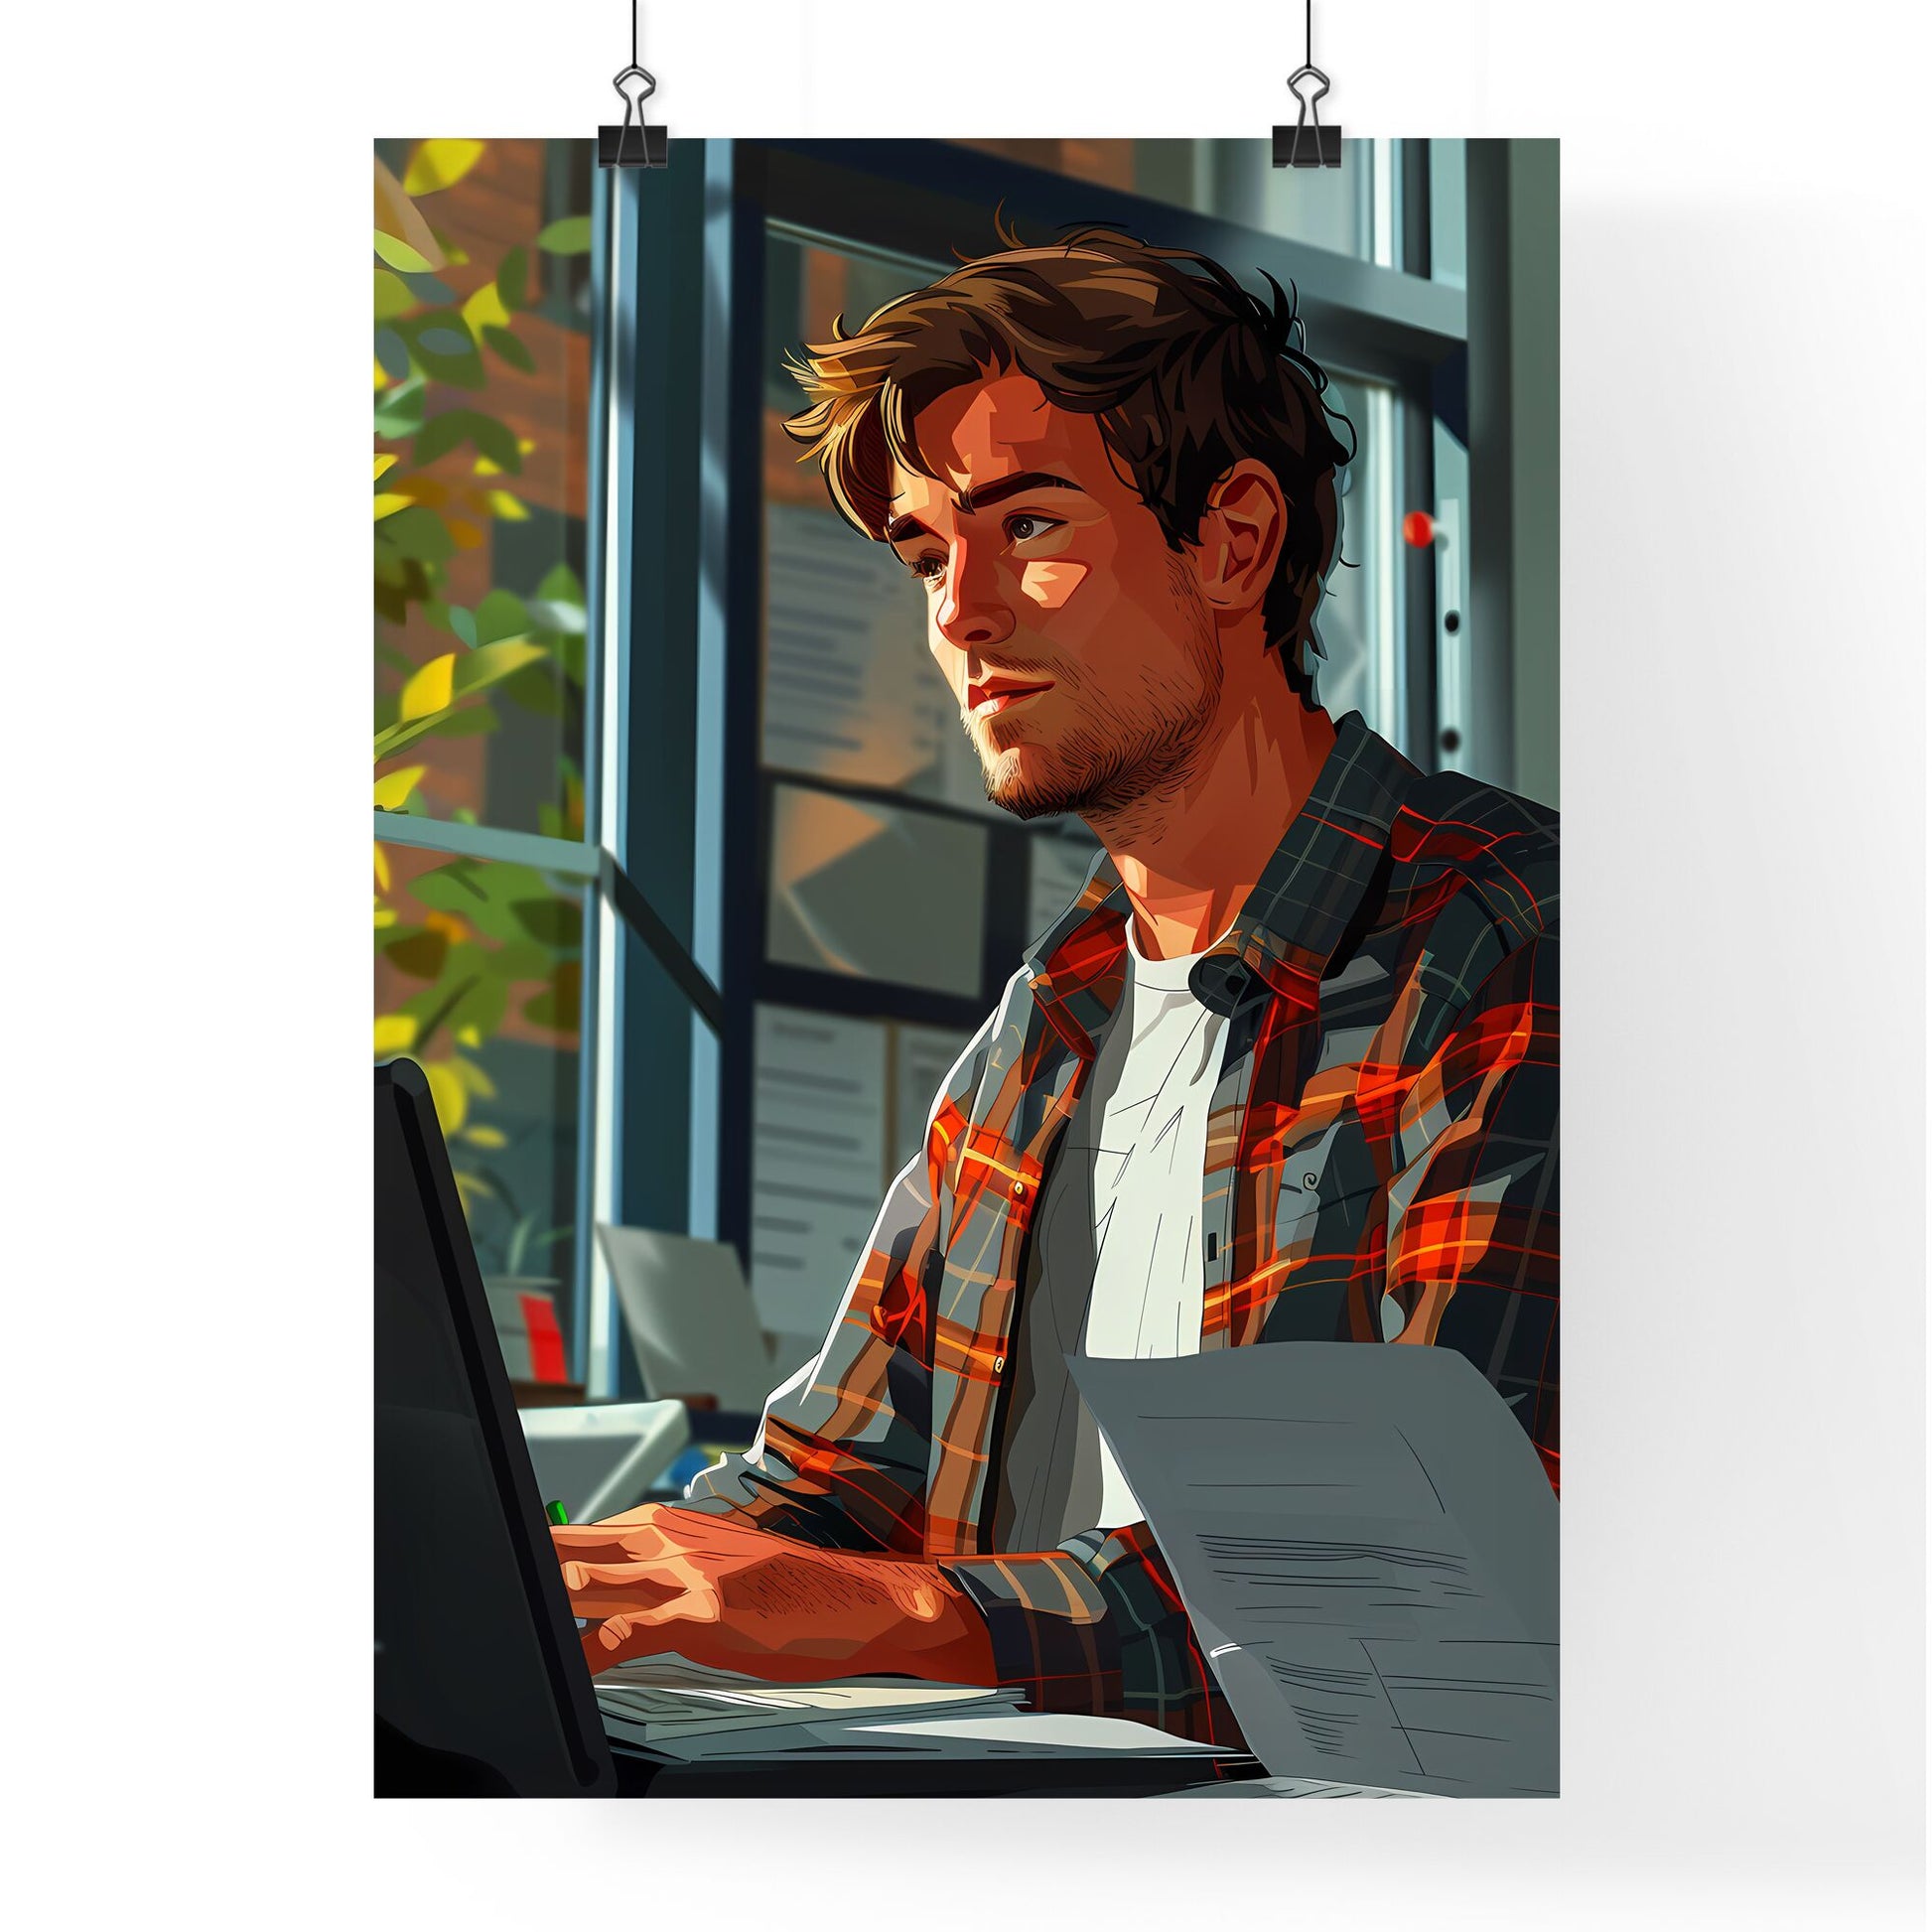 Vibrant Painting Depicts an Individual Working on a Laptop in a Professional Setting Default Title